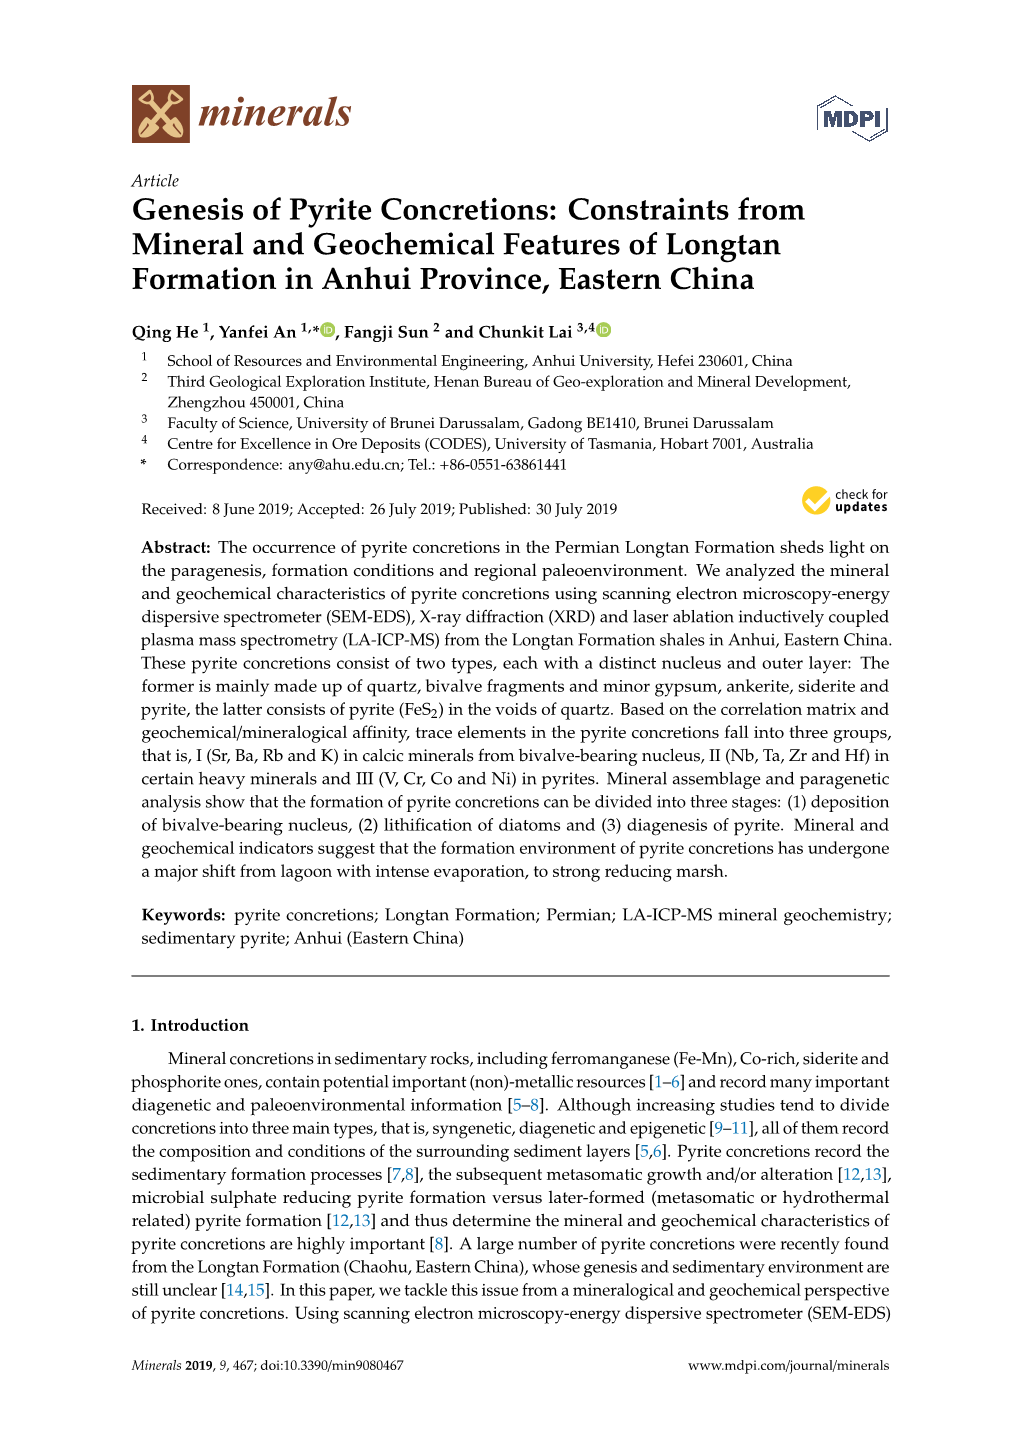 Genesis of Pyrite Concretions: Constraints from Mineral and Geochemical Features of Longtan Formation in Anhui Province, Eastern China